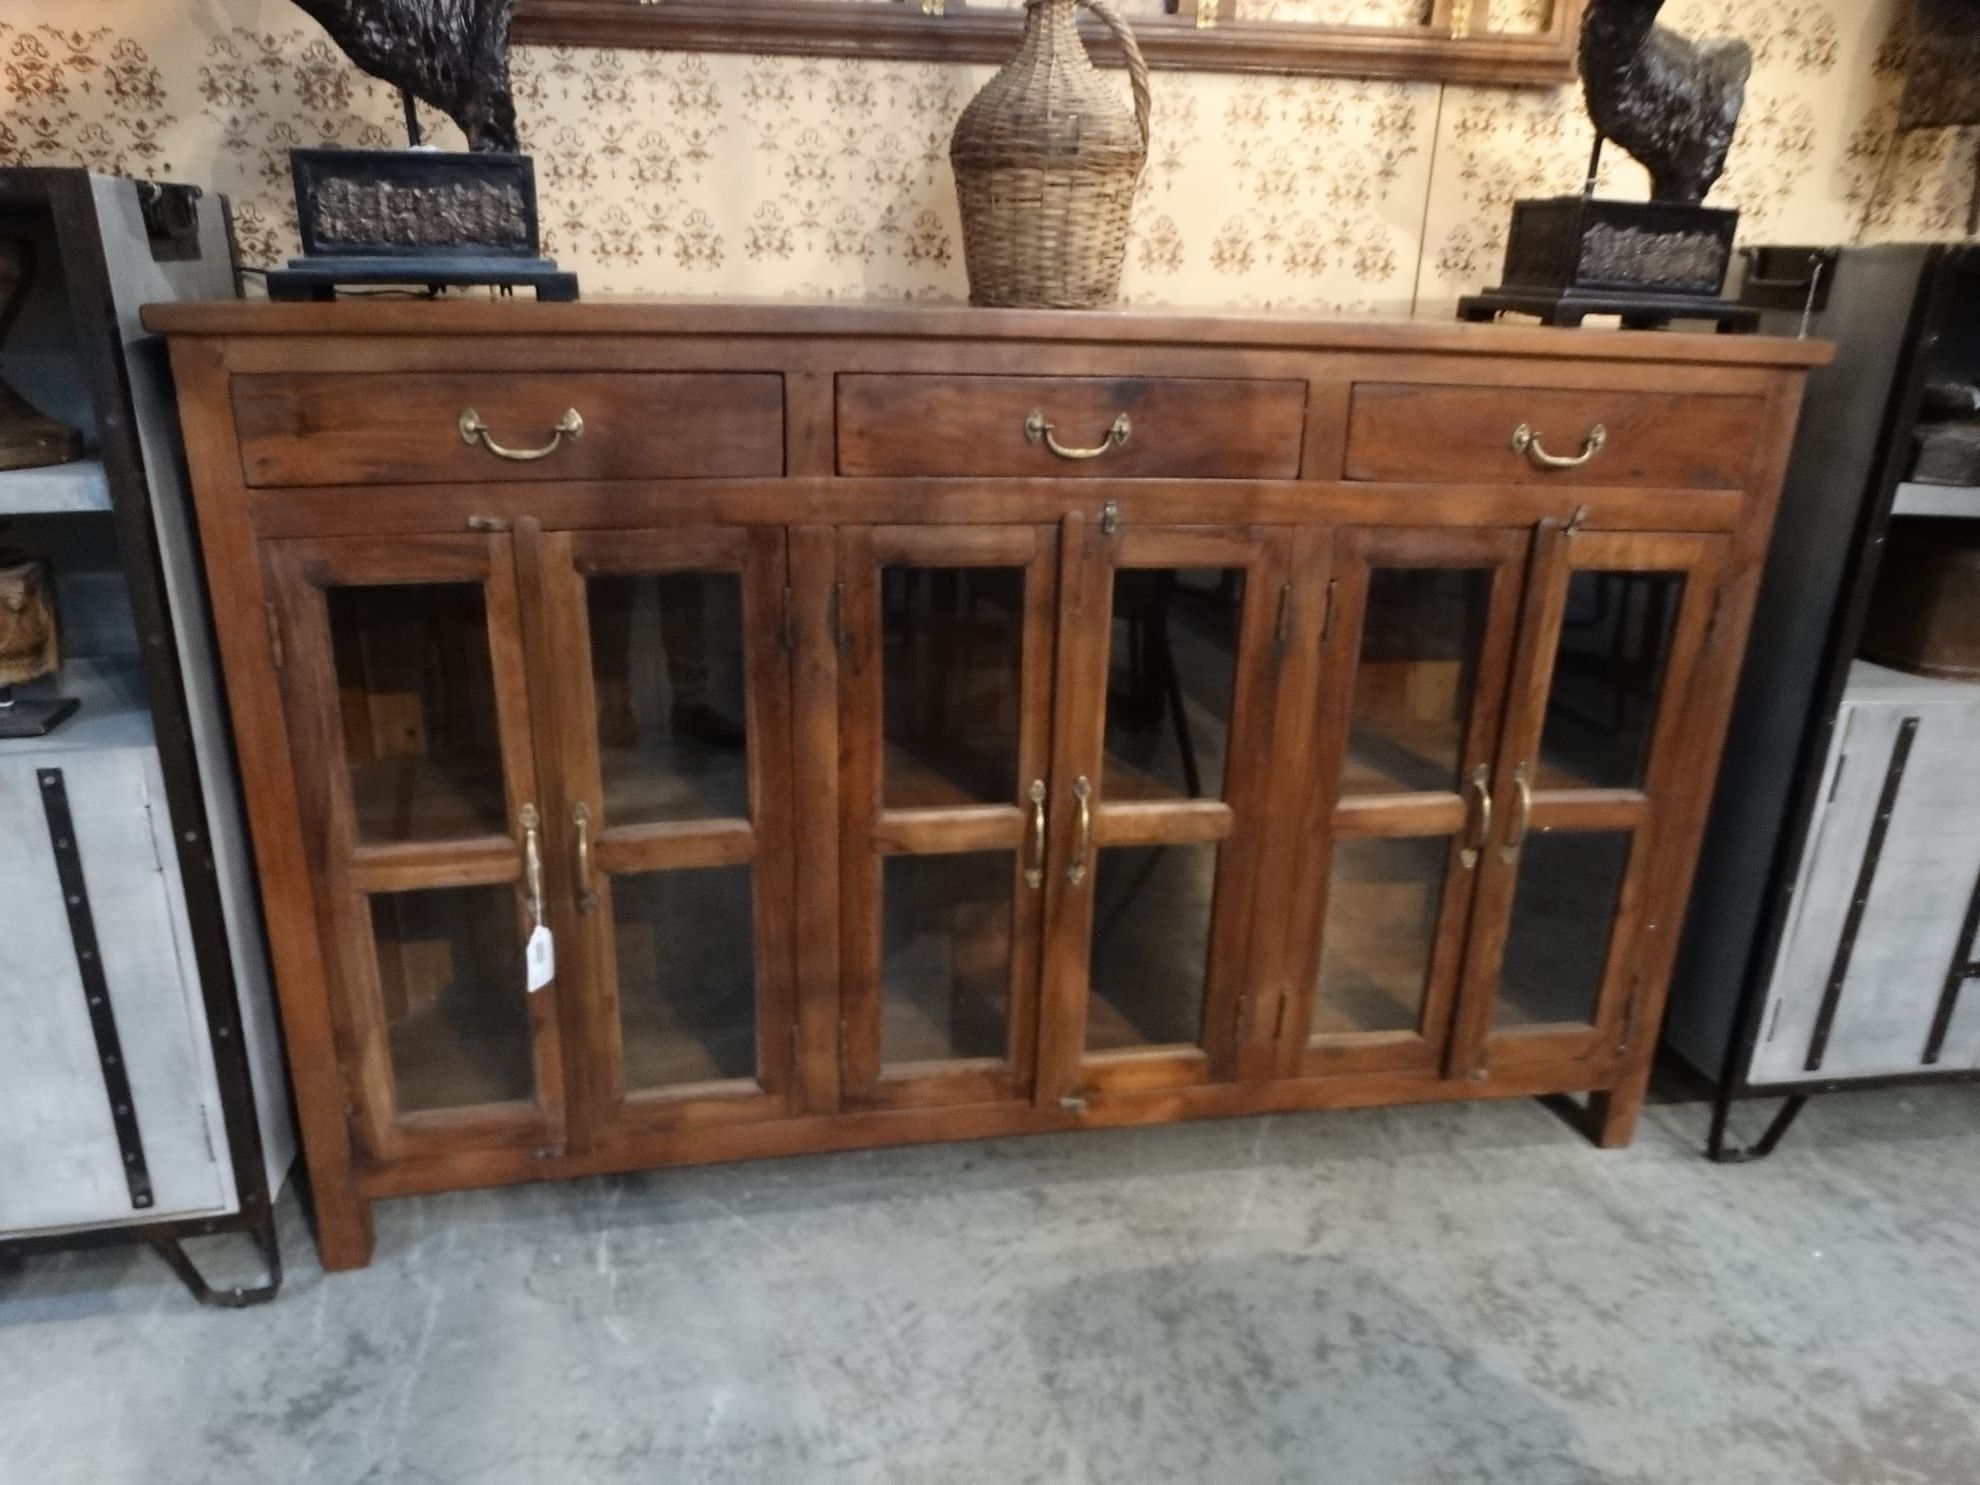 Most Recent Antique Storage Sideboards With Doors With Regard To Buy Stackable Sideboard Buffet Storage Cabinet Online (View 7 of 10)